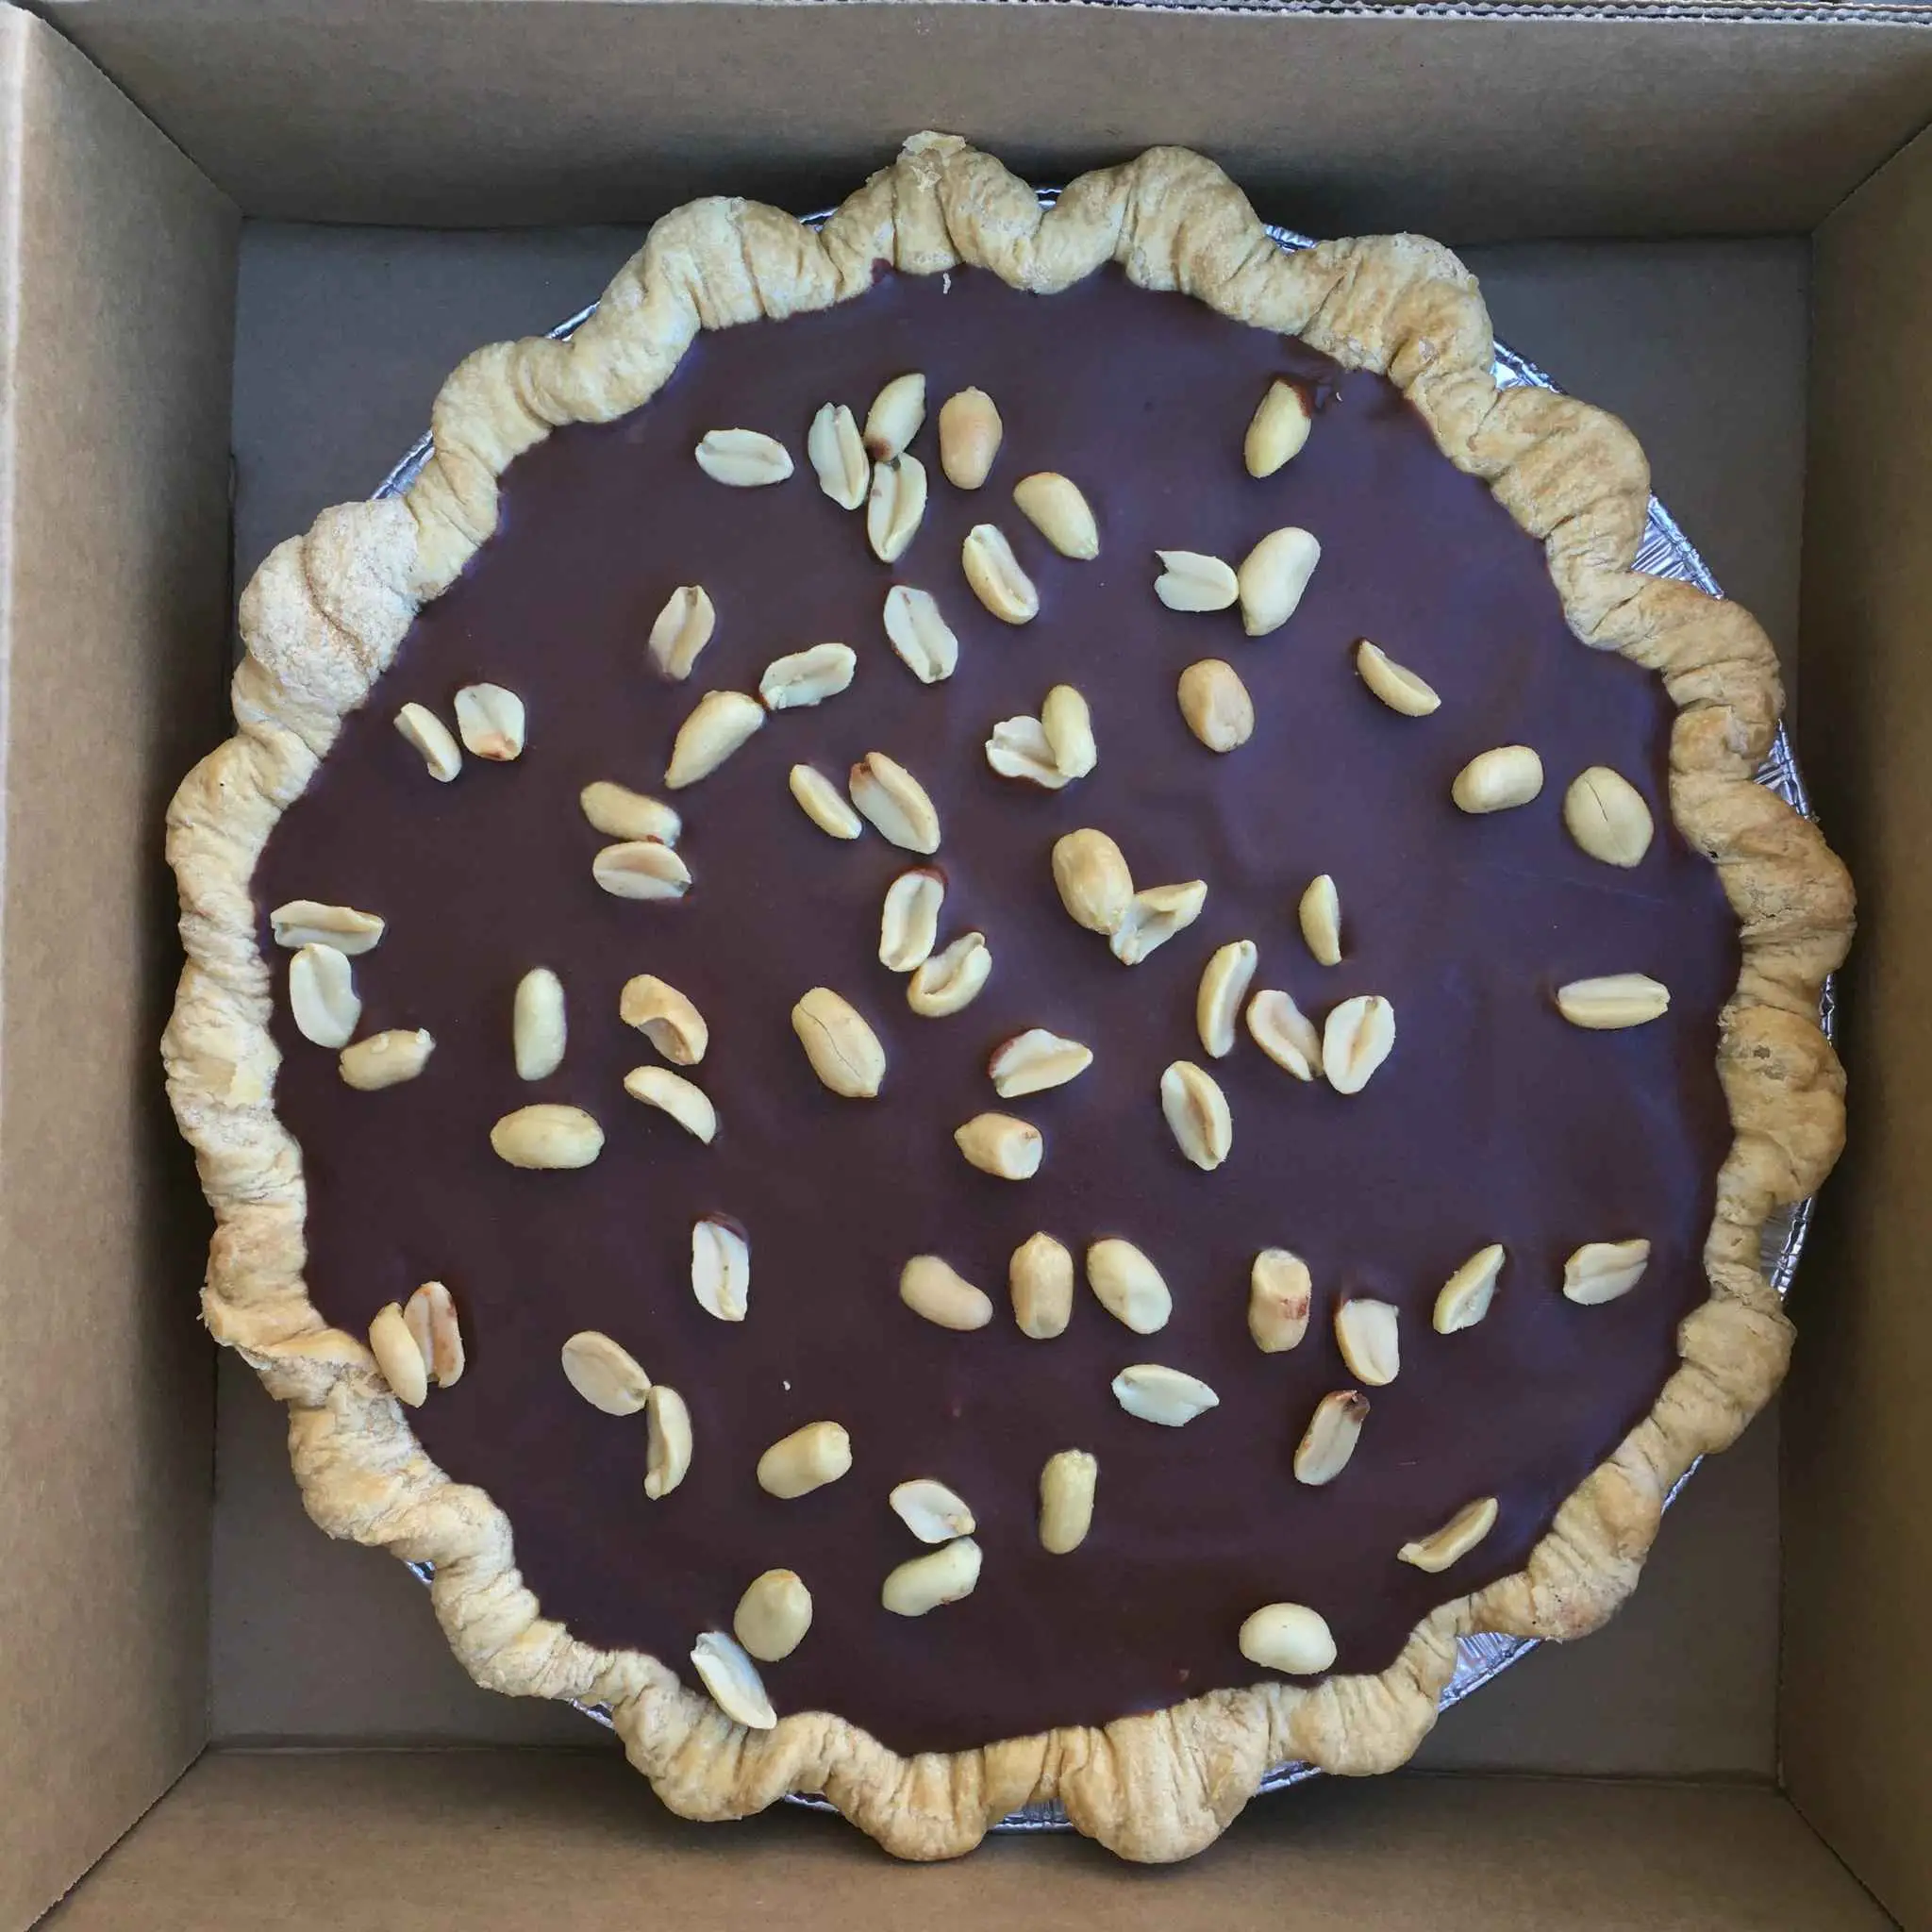 Chocolate Peanut Butter Pie Delivery